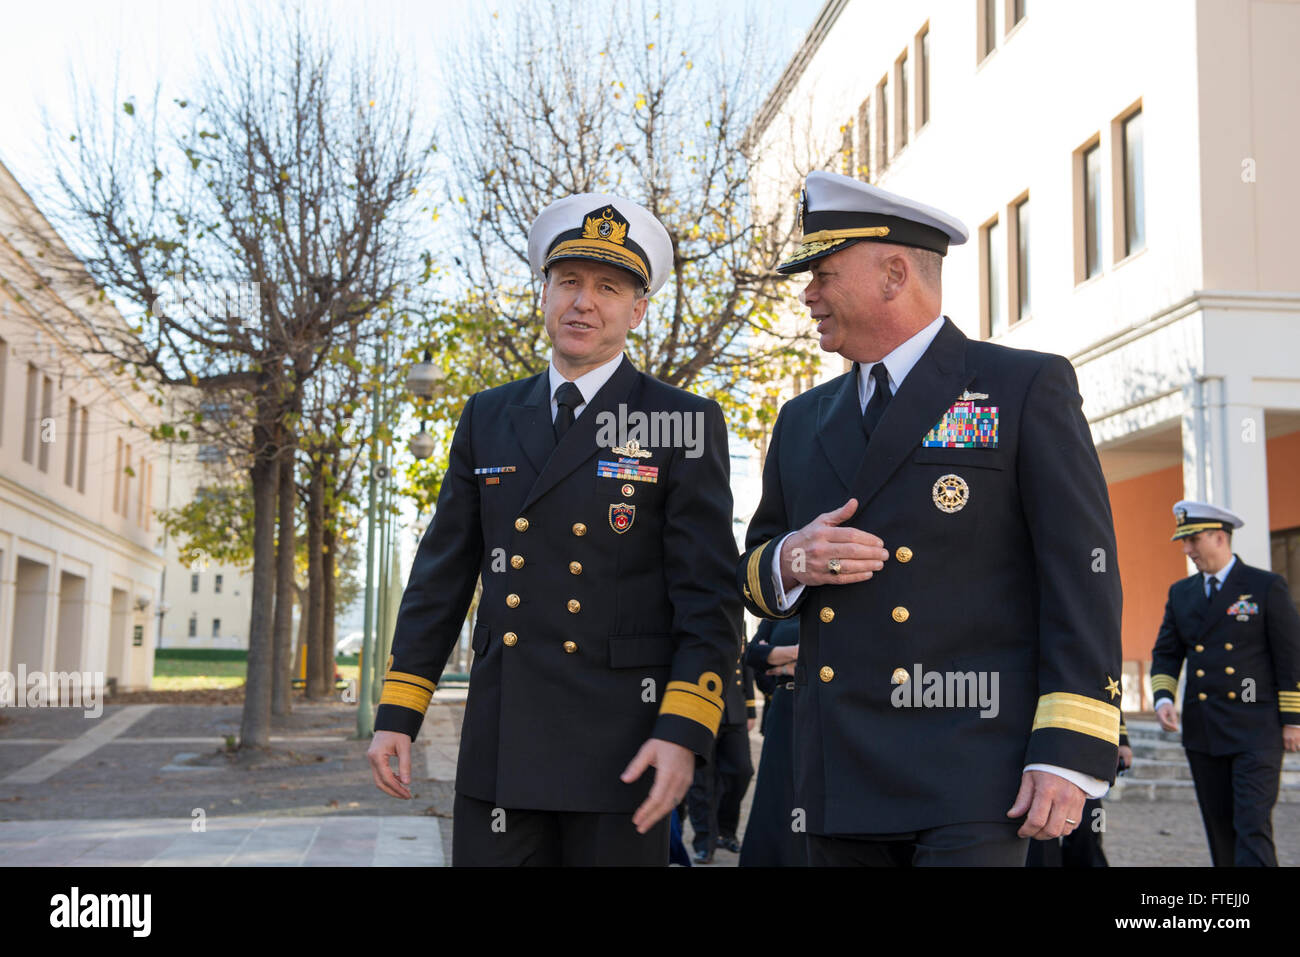 (Dec. 10, 2014) Turkish navy Rear Adm. Oguz Karaman, head of Turkish Naval Forces Commandâs Plans and Policy Division, left, walks with Rear Adm. John Nowell, chief of staff, U.S. Naval Forces Europe-Africa, at Naval Support Activity Naples, Dec. 10, 2014. U.S. Naval Forces Europe-Africa/U.S. 6th Fleet staff hosted a Turkish naval delegation to discuss future opportunities to strengthen interoperability. Stock Photo